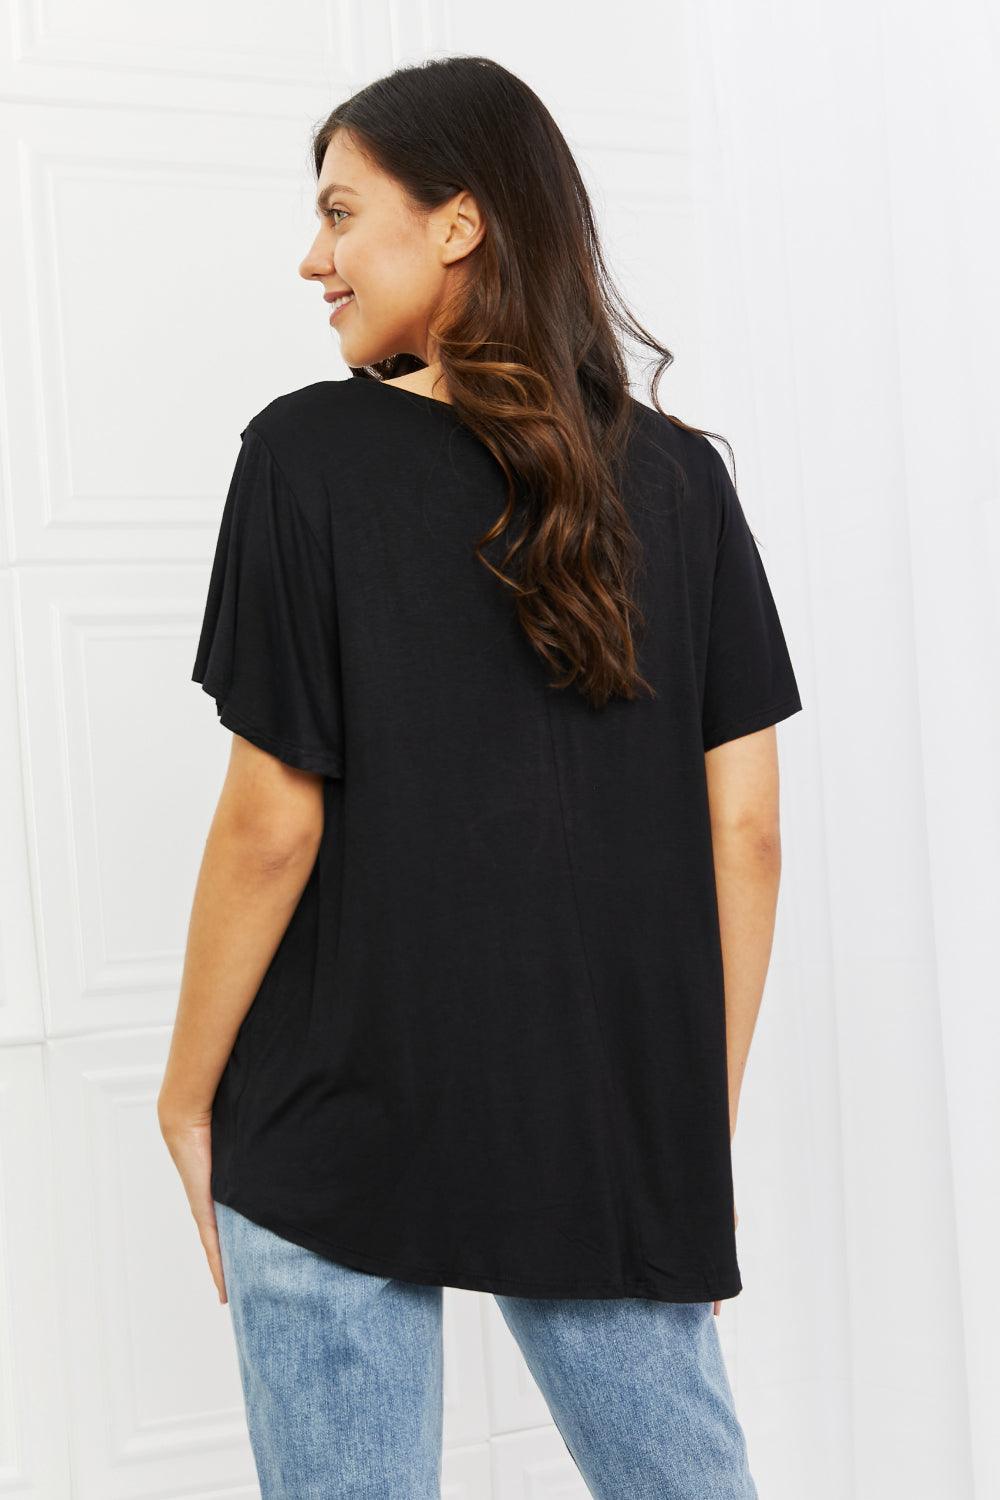 Carefully Embroidered Short Sleeve Black Lace Top - MXSTUDIO.COM